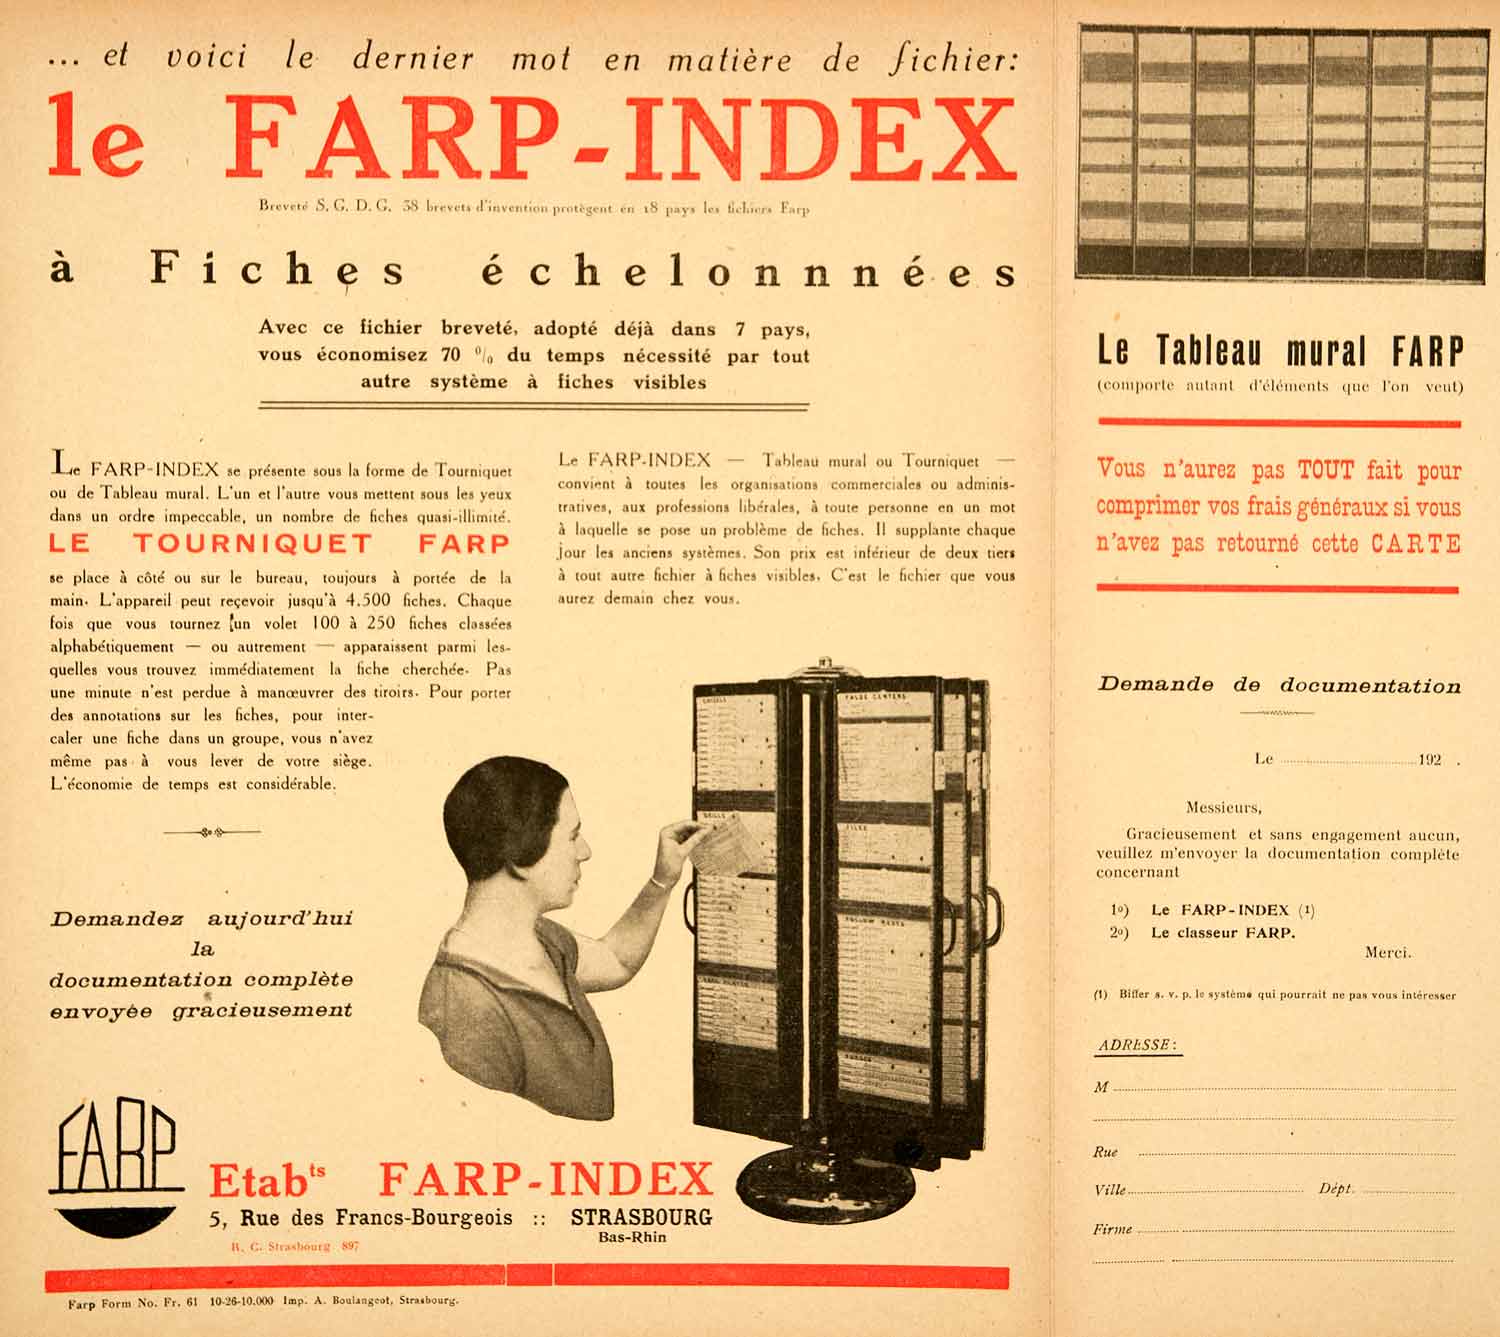 1926 Lithograph Ad Farp-Index Filing System 5 Rue Fracs-Bourgeois VEN4